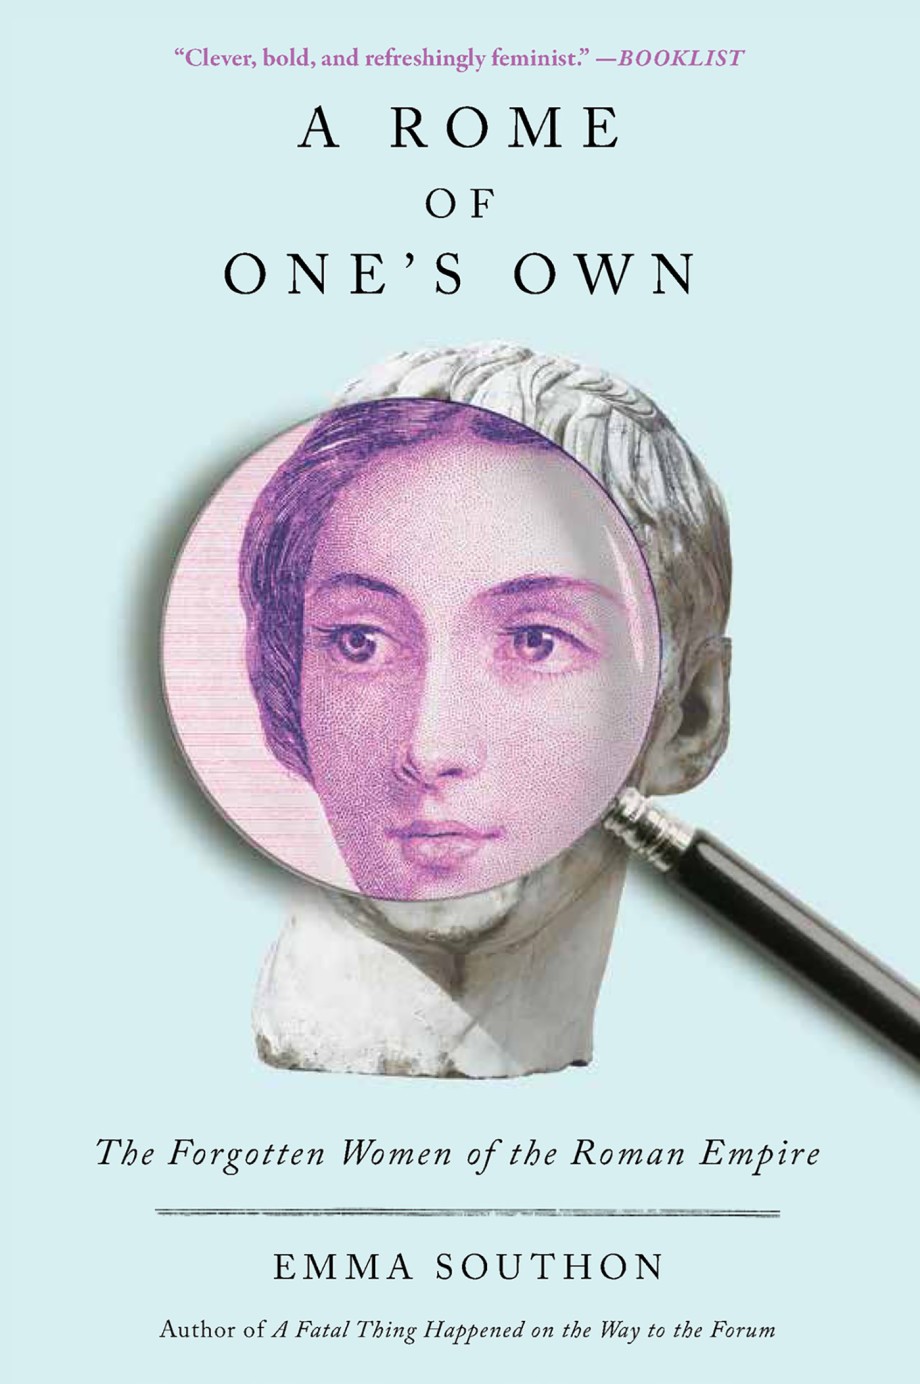 Rome of One's Own The Forgotten Women of the Roman Empire